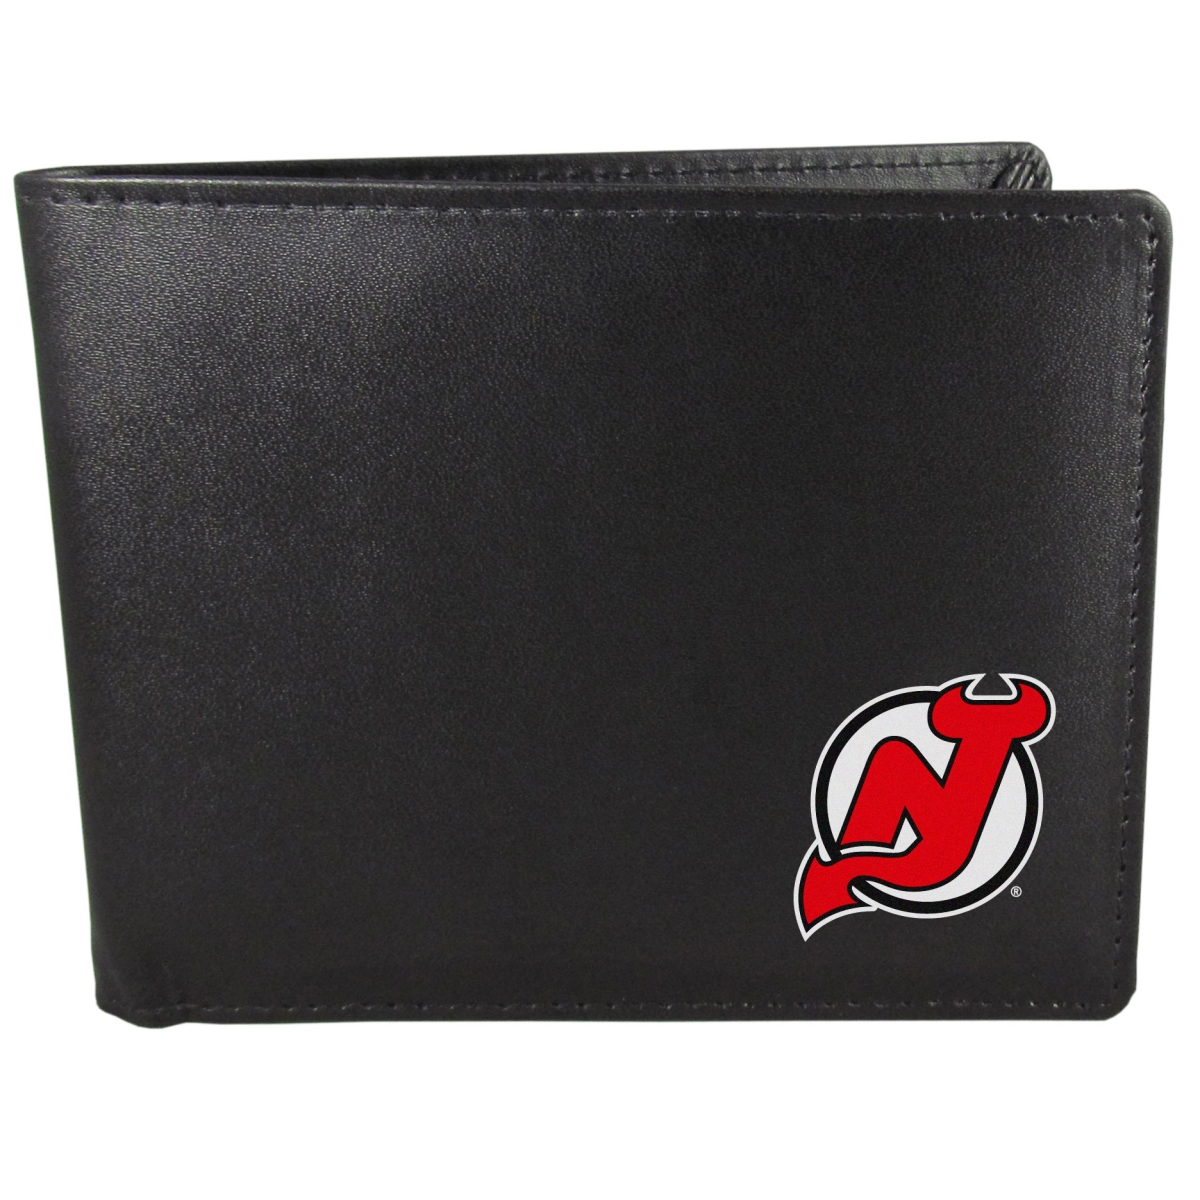 Picture of Siskiyou HBWP50 Male NHL New Jersey Devils Bi-fold Wallet - One Size